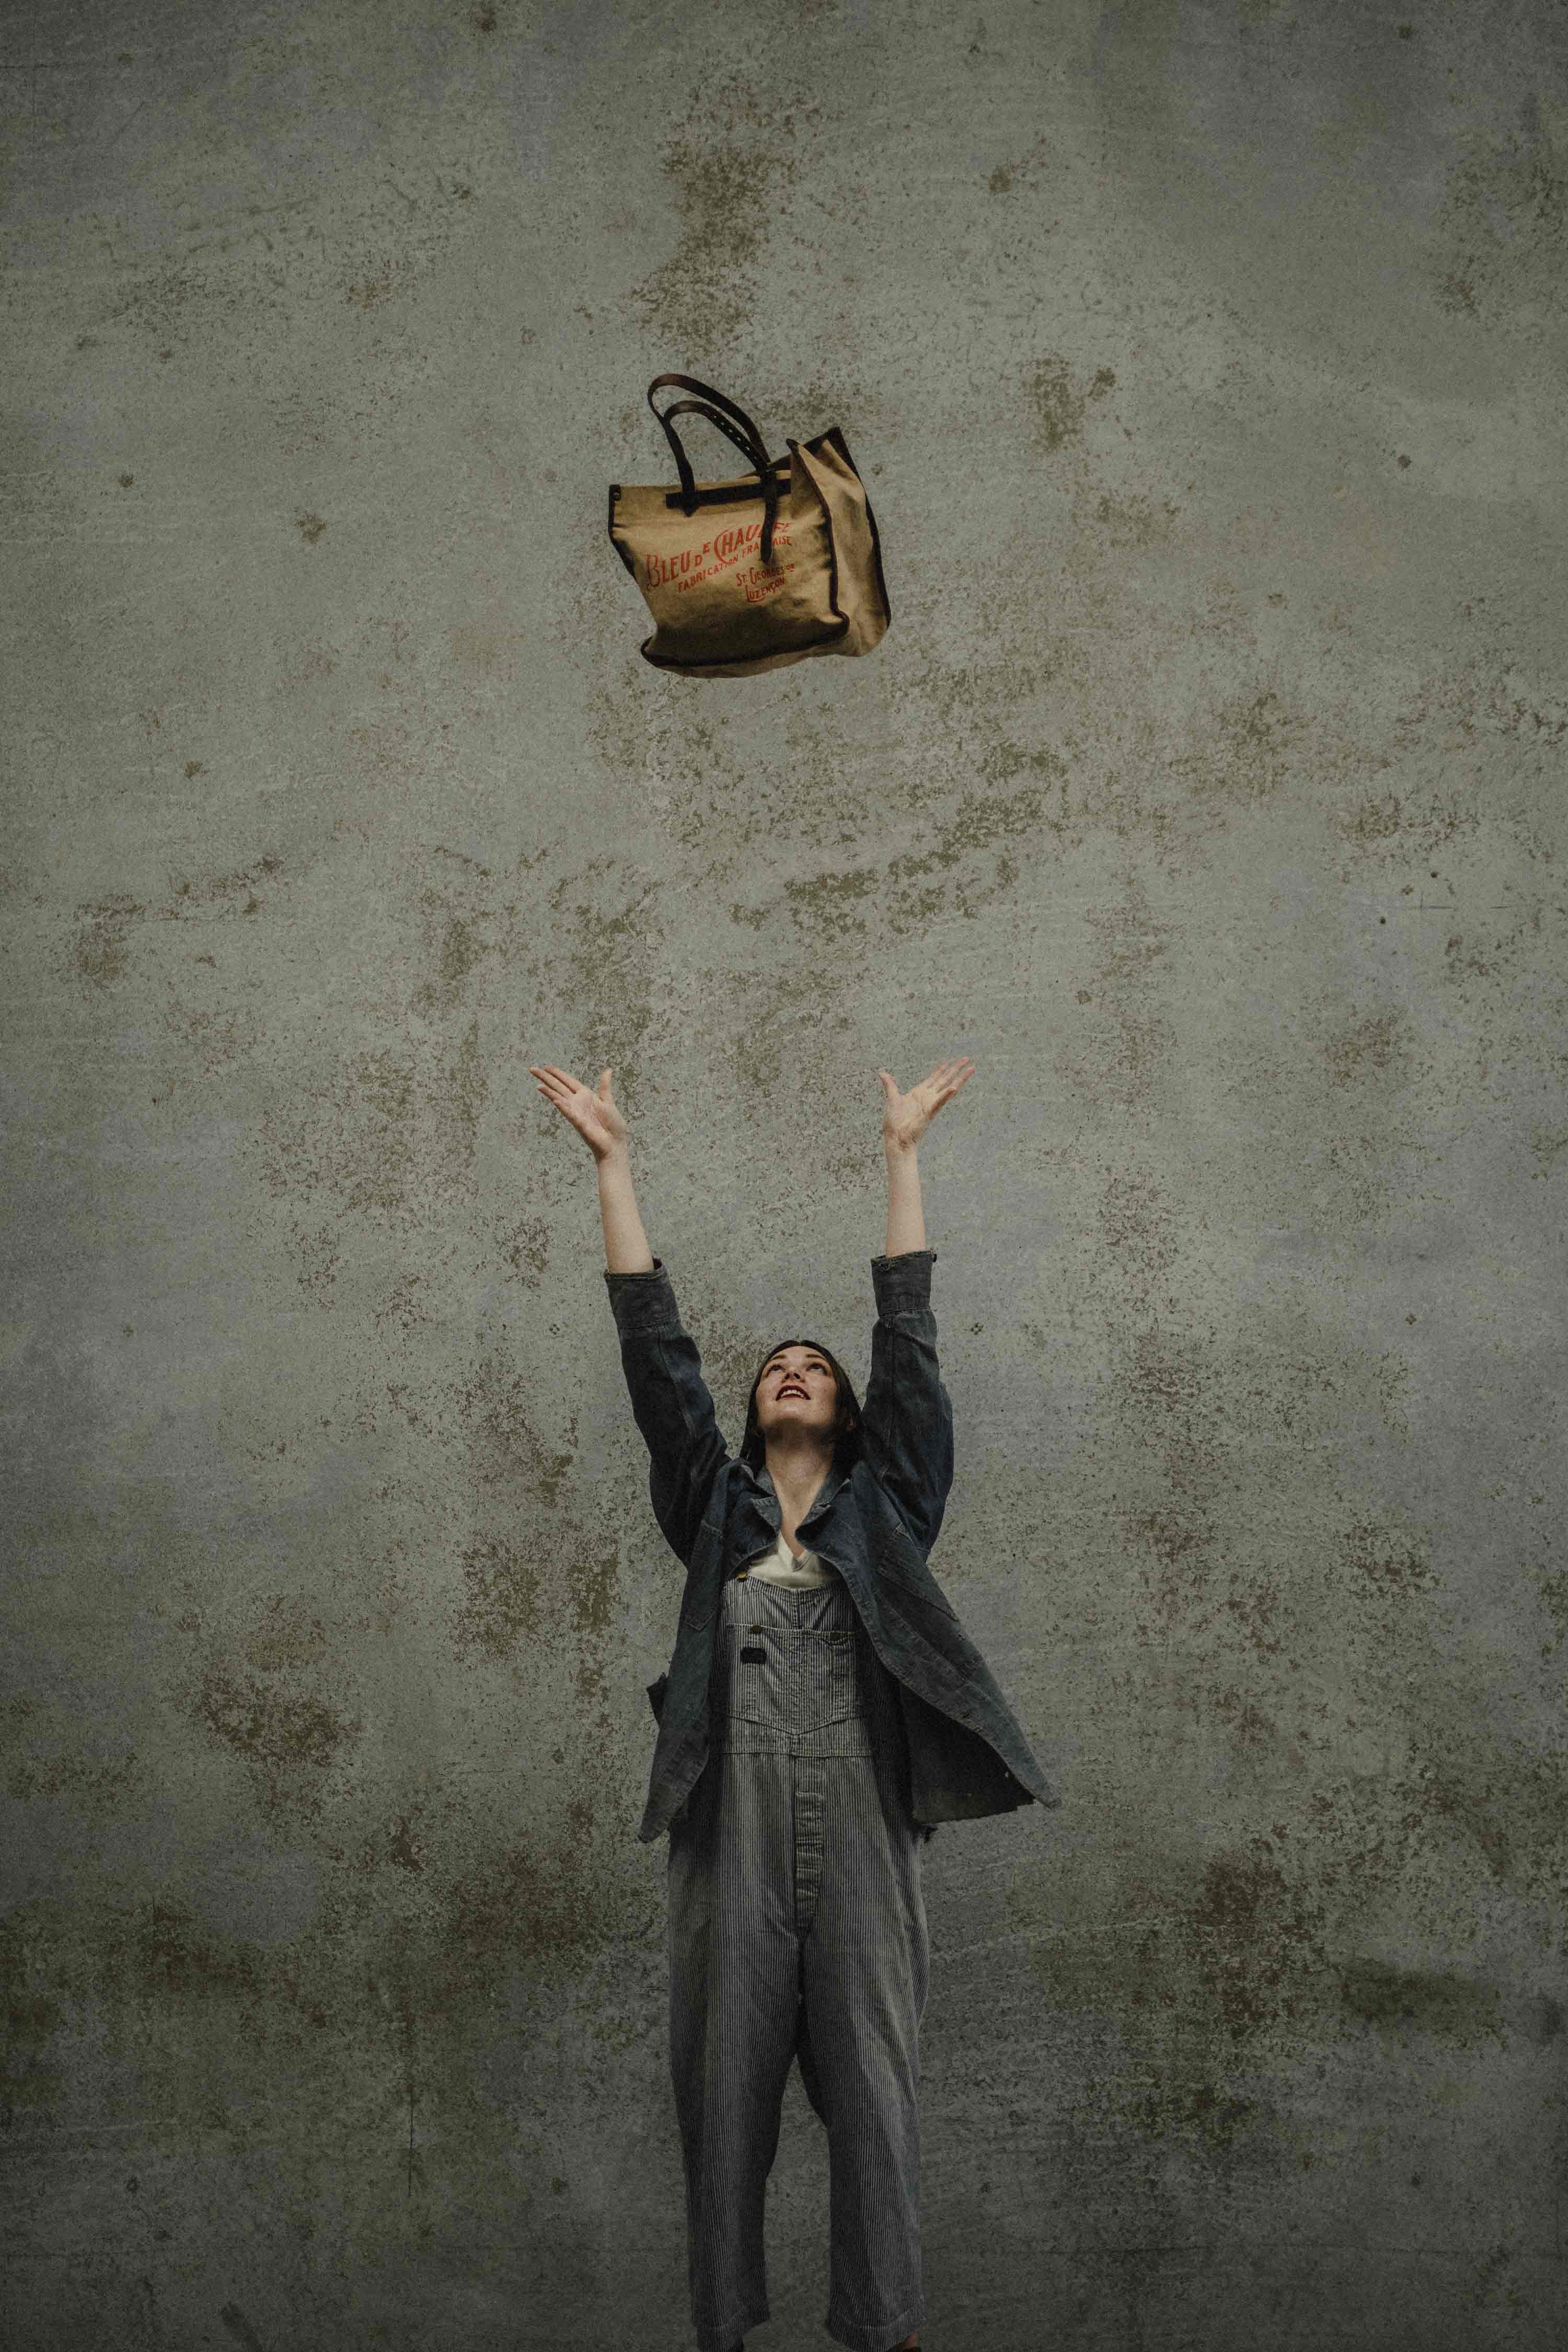 A woman throws a French-made shopping bag over her head